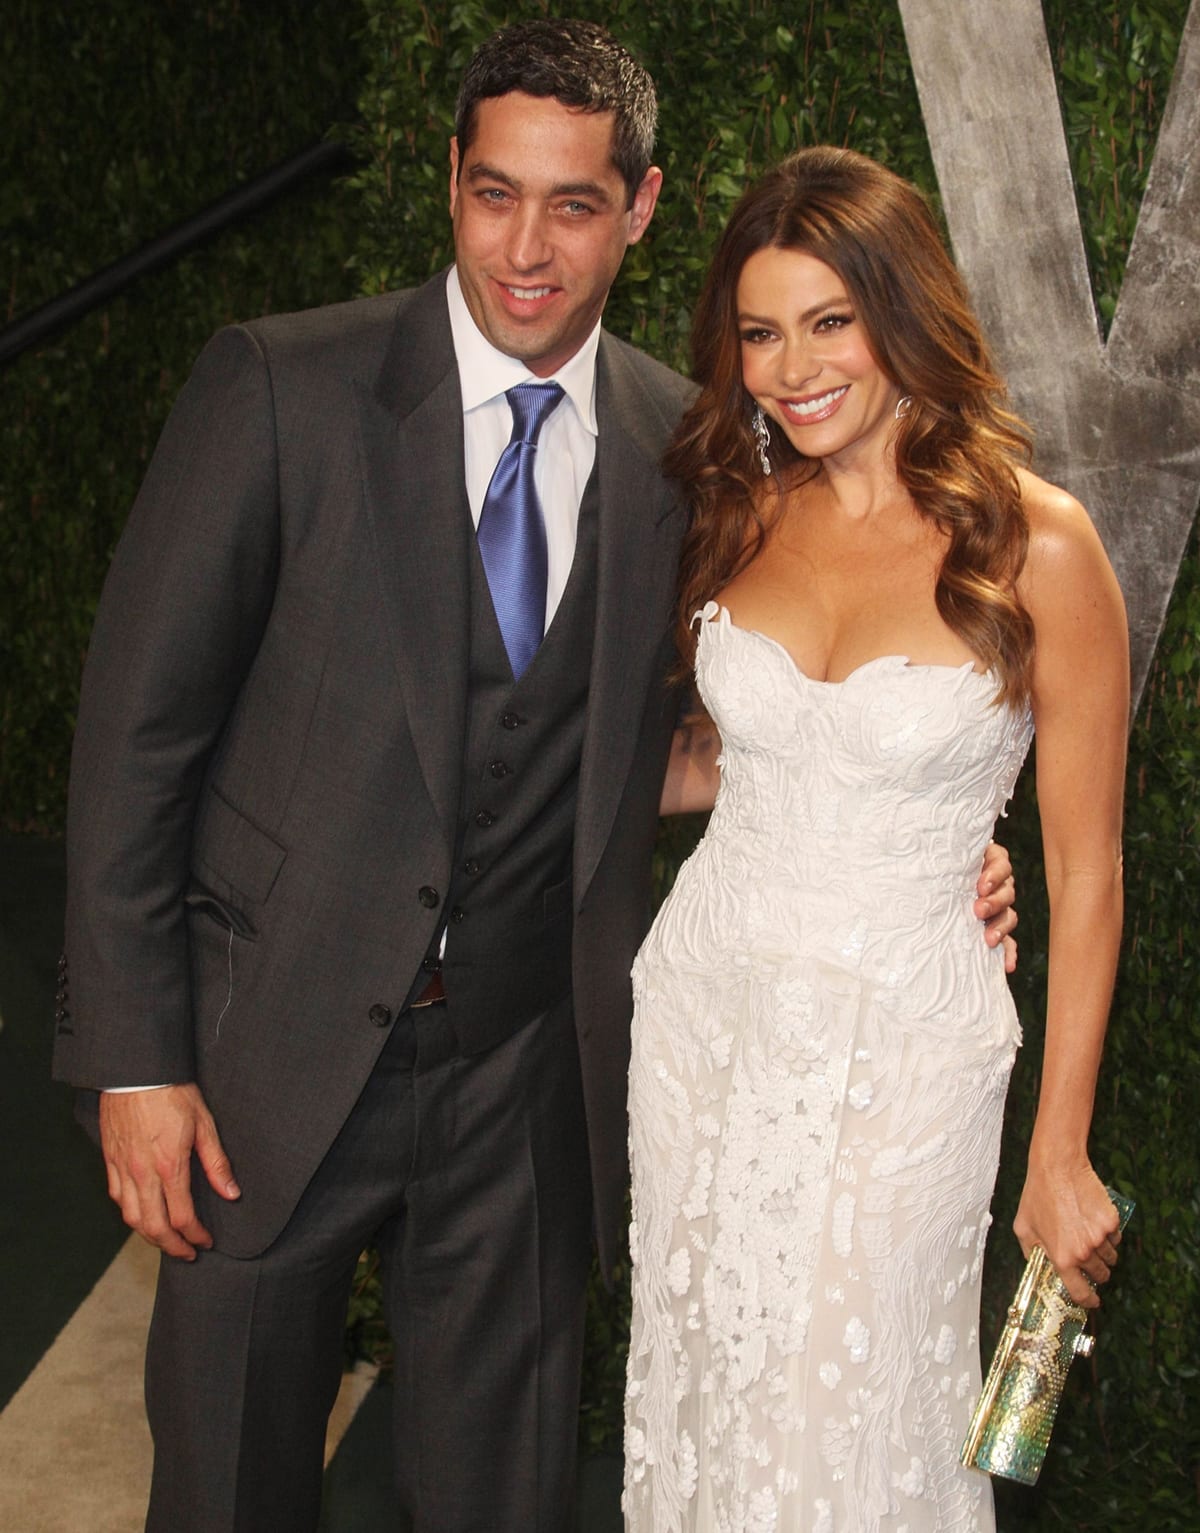 Nick Loeb and Sofia Vergara announced their engagement in 2012 after dating for two years